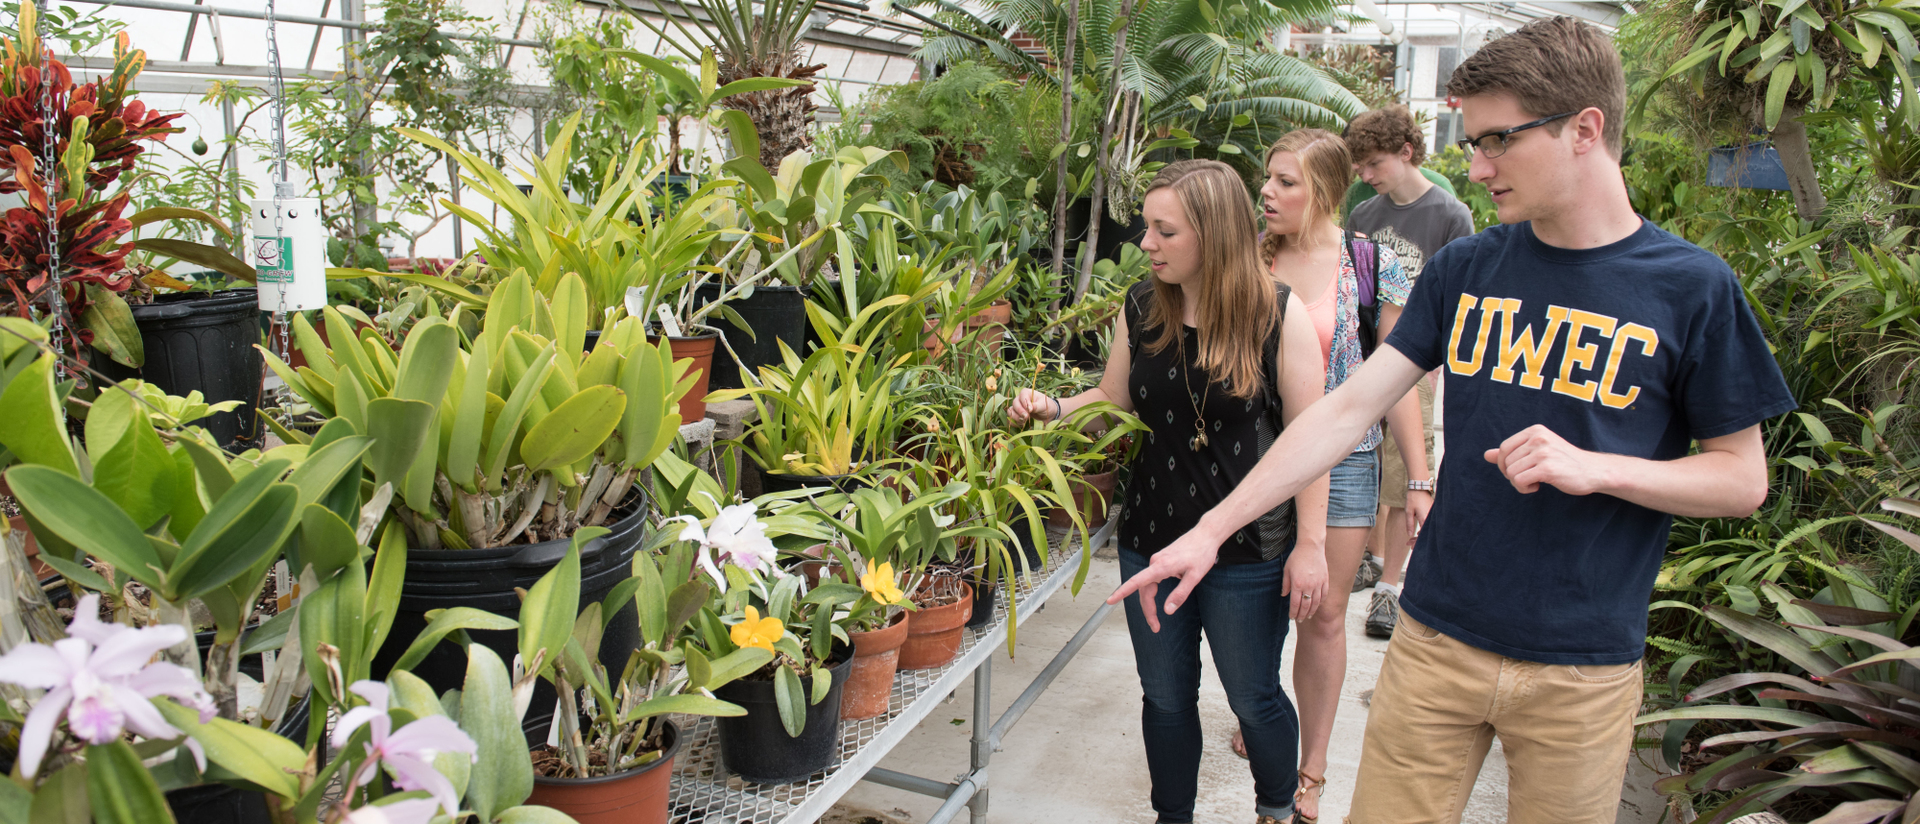 Students in the UWEC greenhouse